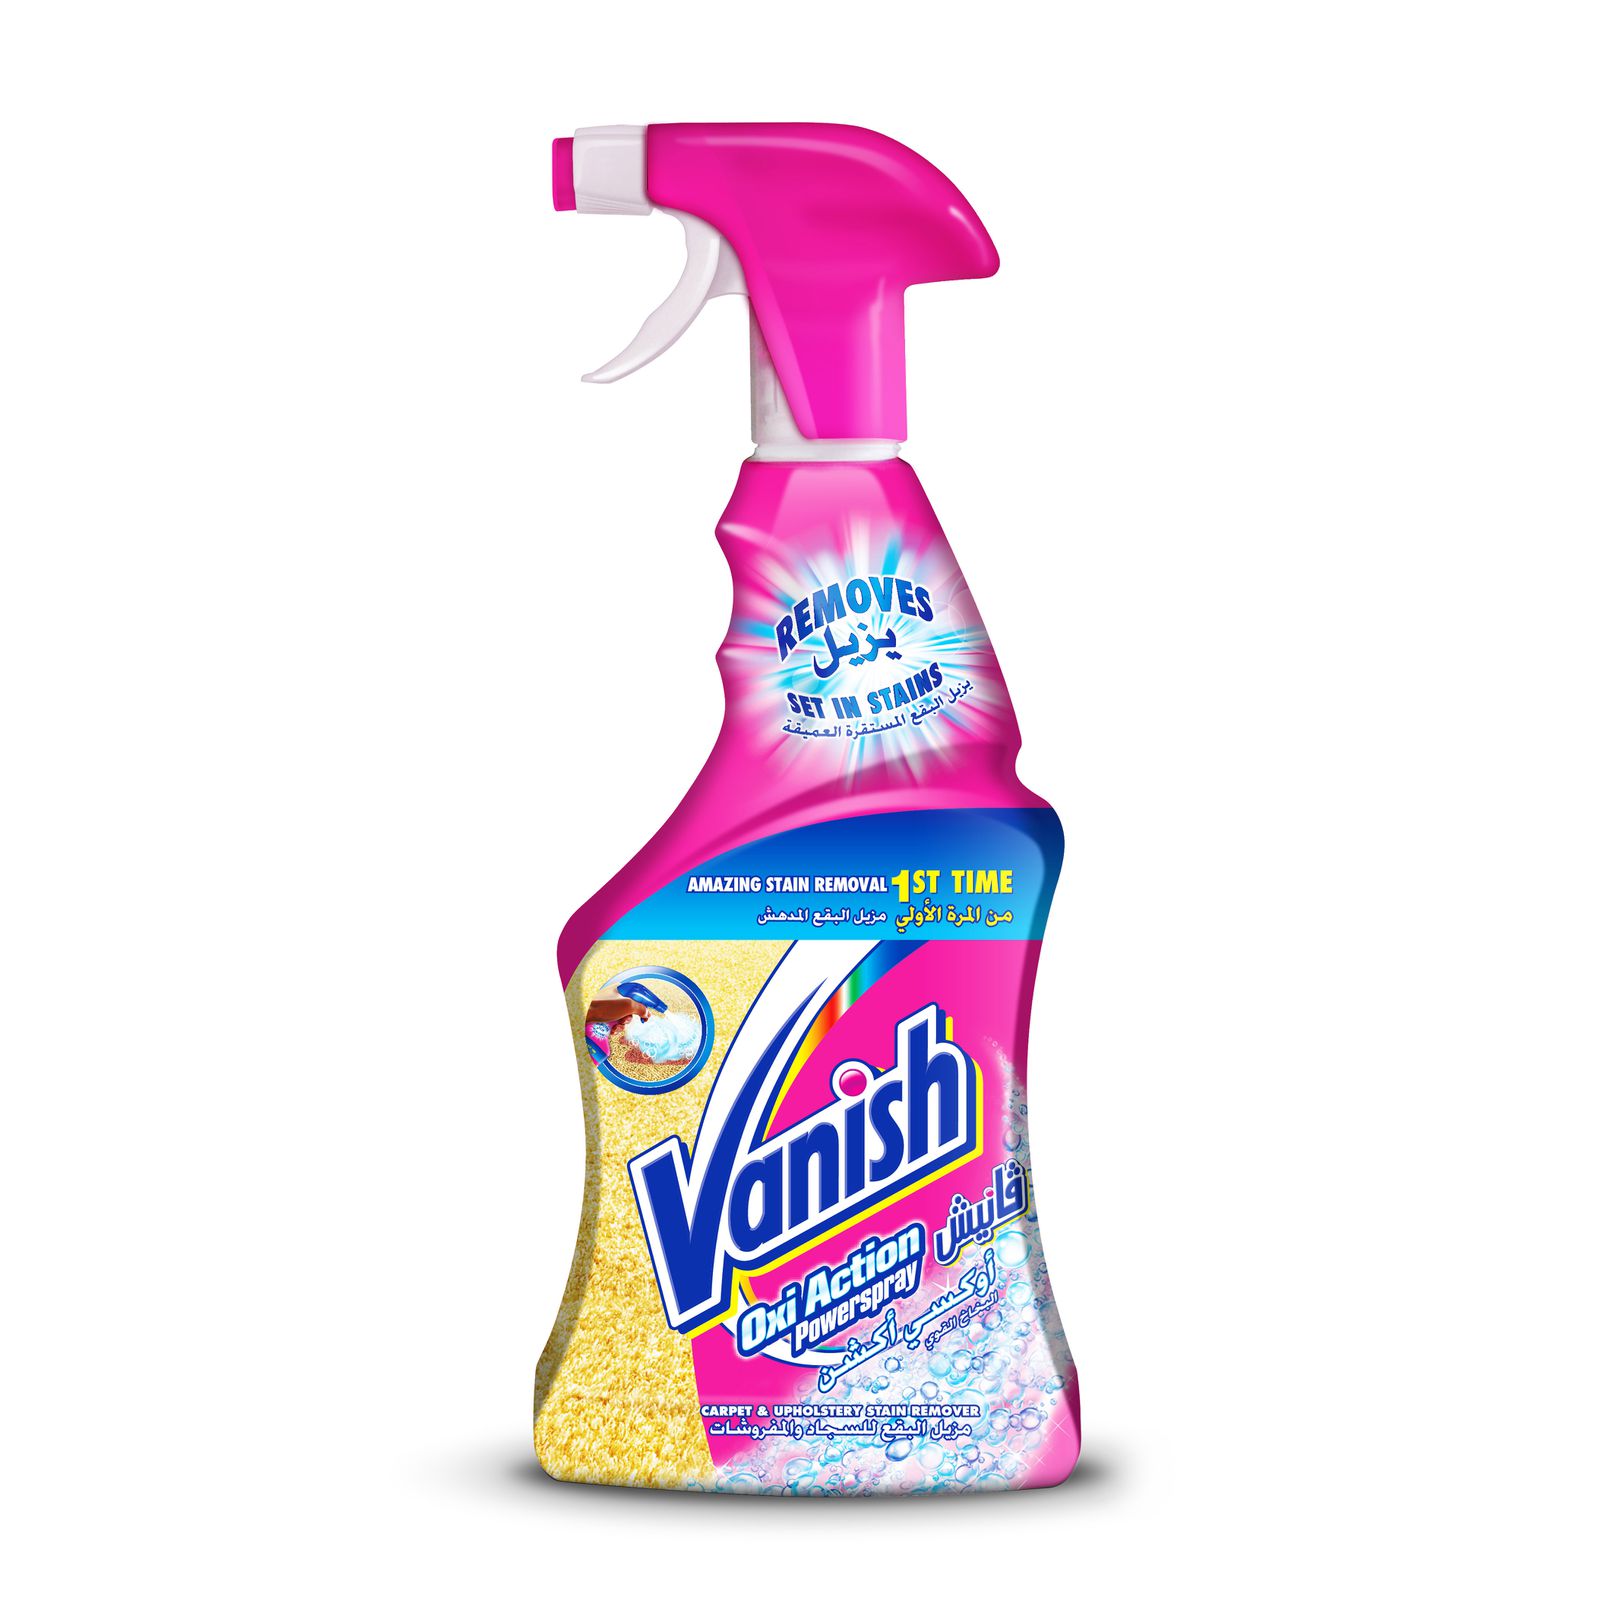 Vanish Carpet and Upholstery Cleaner 500ml Oxi Action - Handbagholic